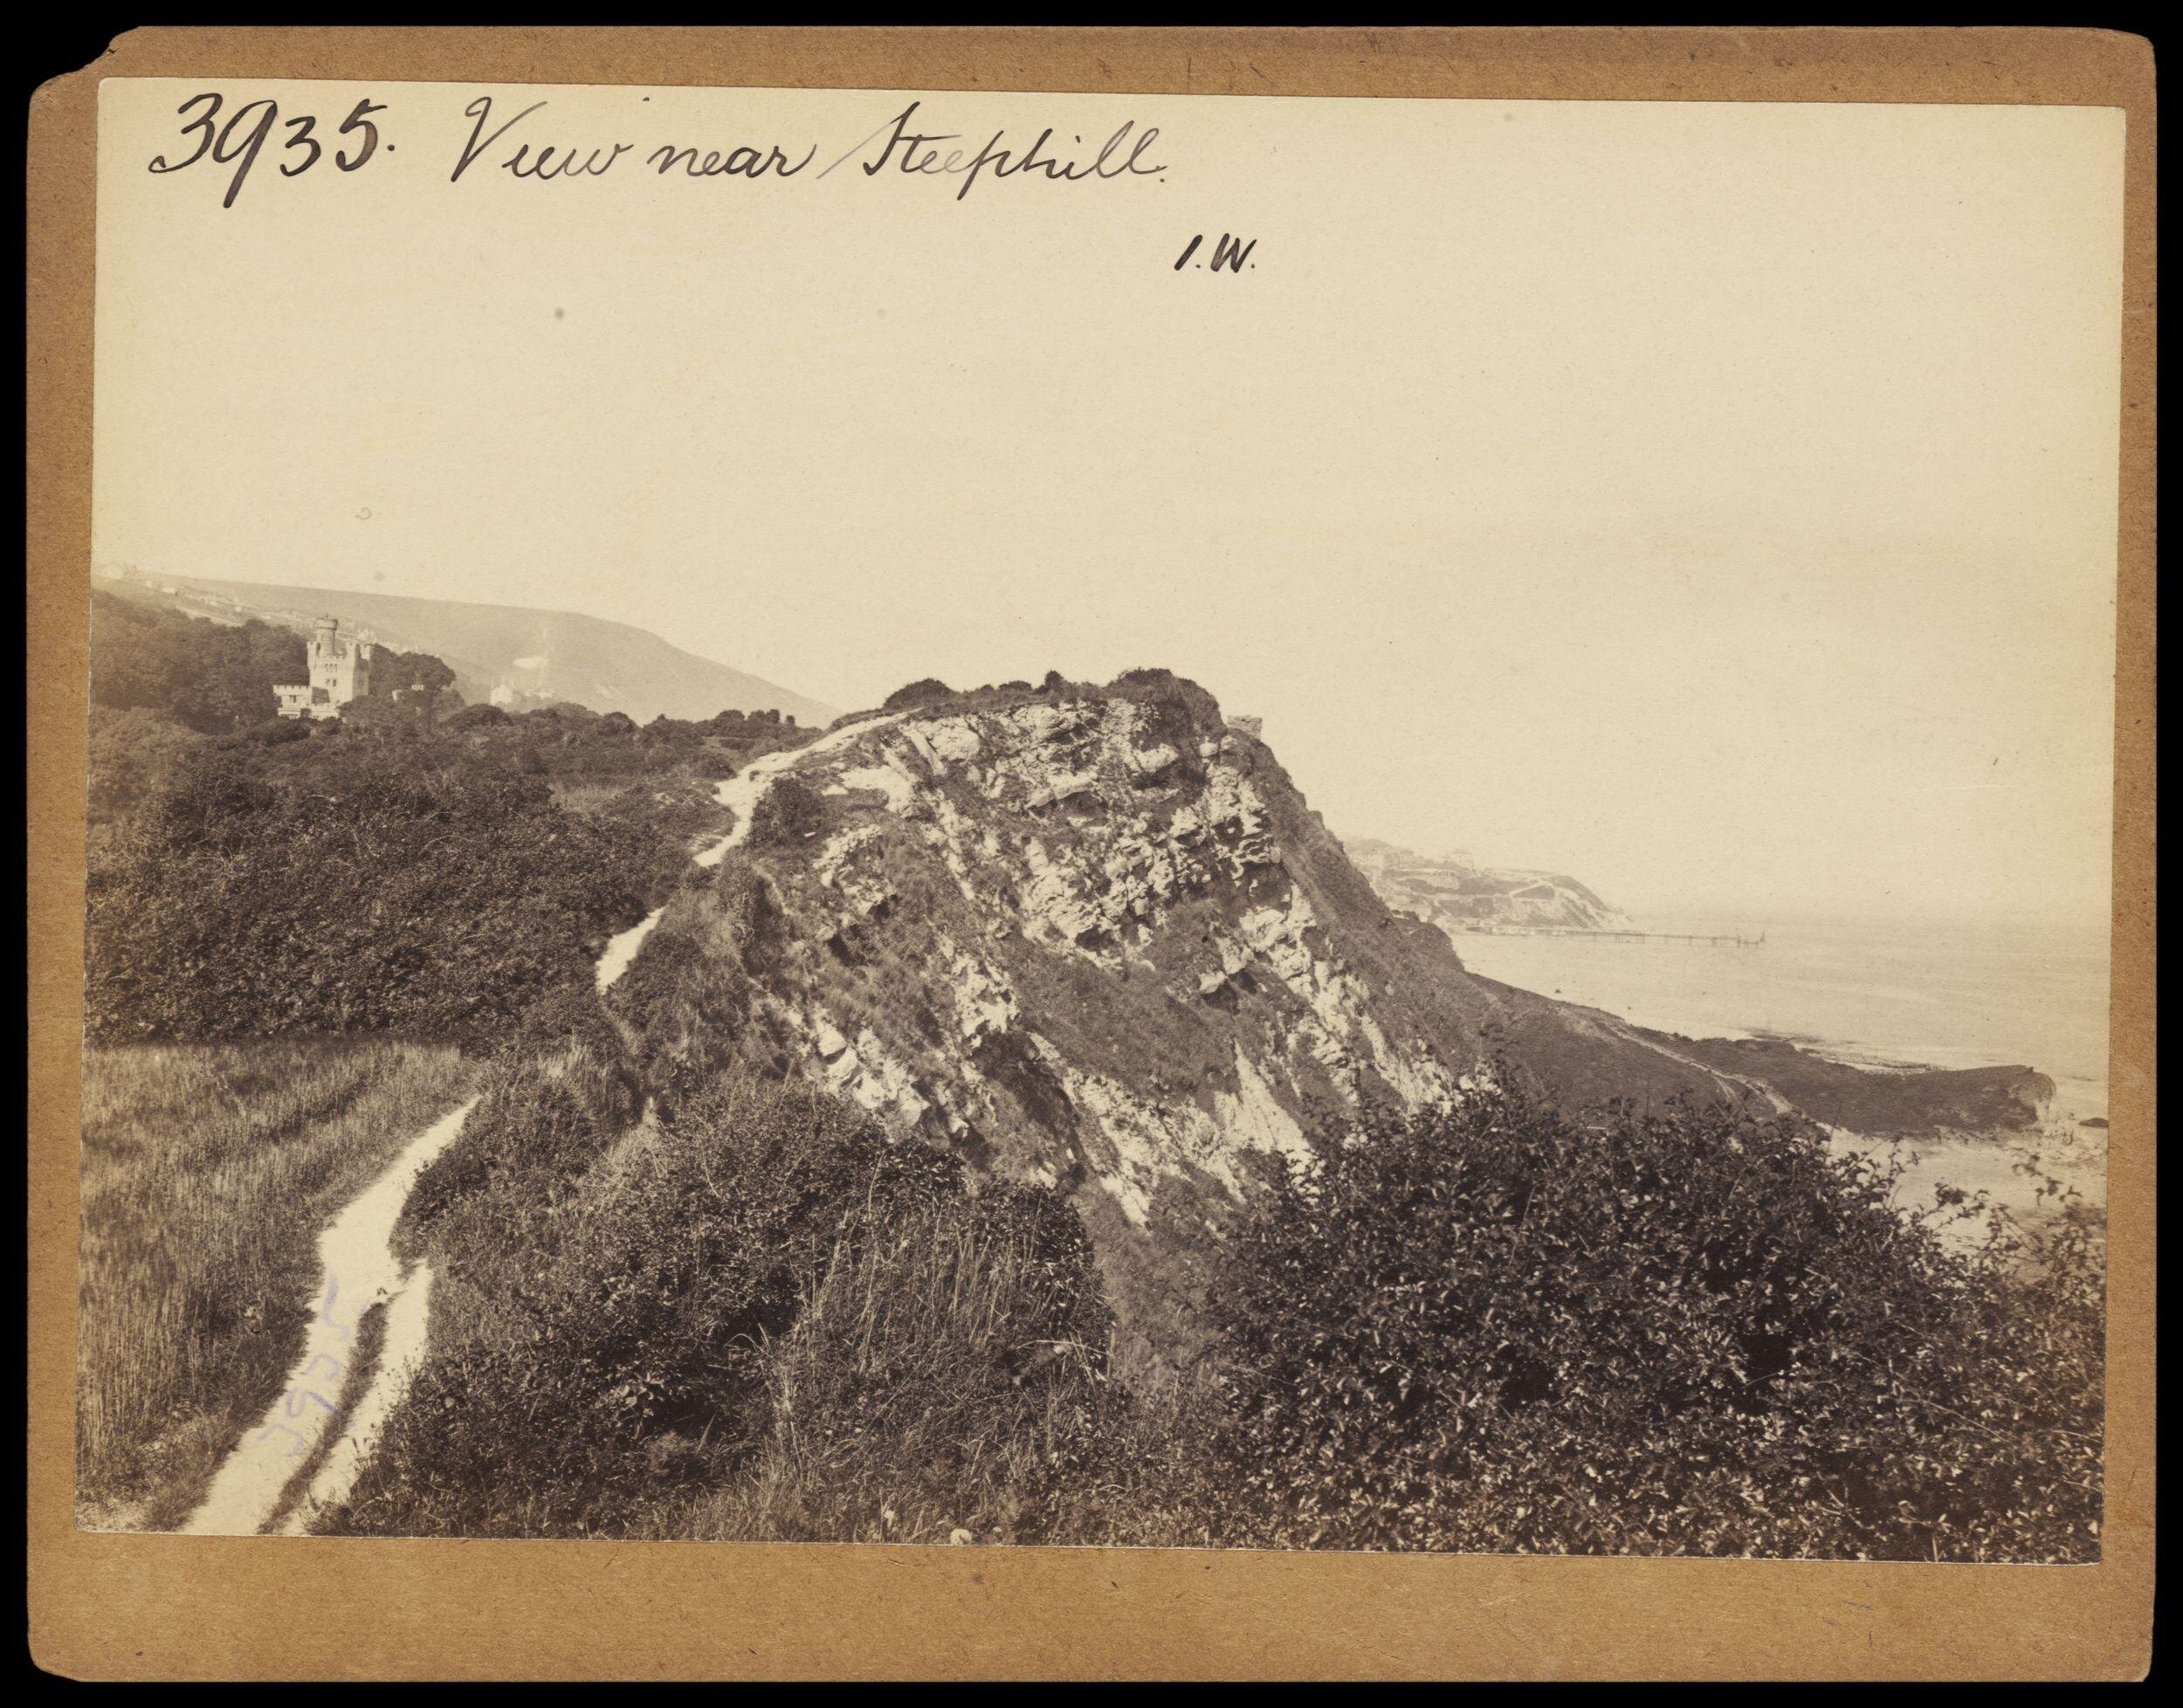 *Photograph by Francis Frith; View near Steephill, c.1860 (Victoria and Albert
        Museum E.208:3370-1994). Click to enlarge.